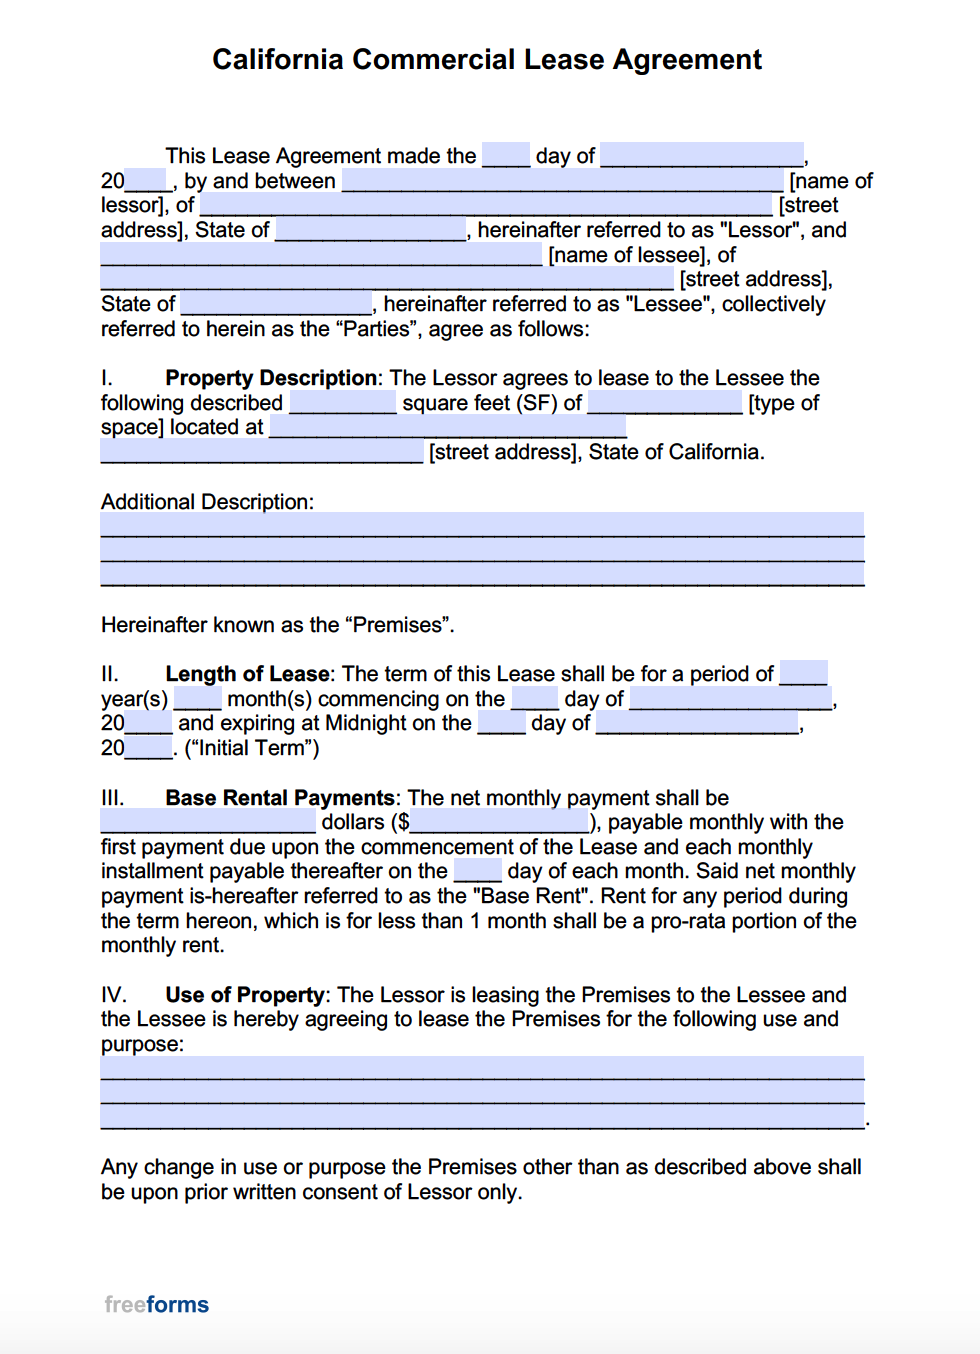 Free California Commercial Lease Agreement Template  PDF  WORD Within Business Lease Agreement Template Free